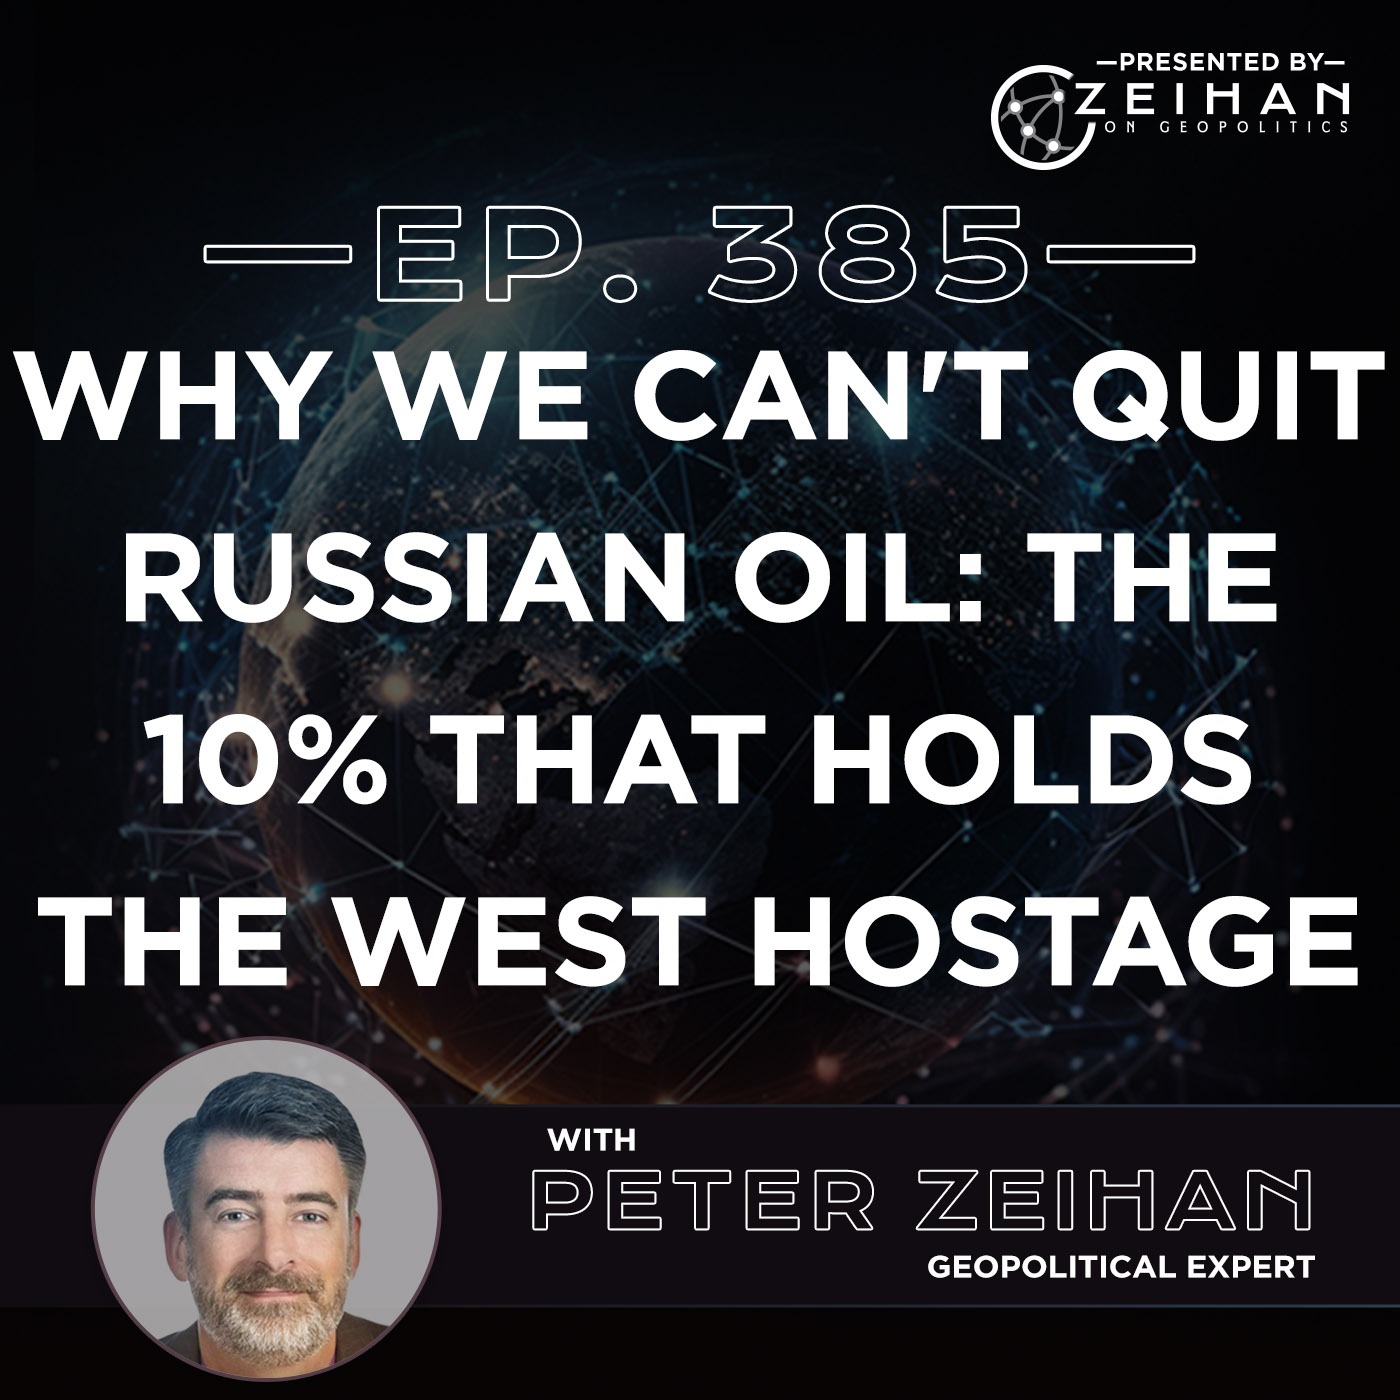 Why We Can't Quit Russian Oil: The 10% That Holds the West Hostage || Peter Zeihan